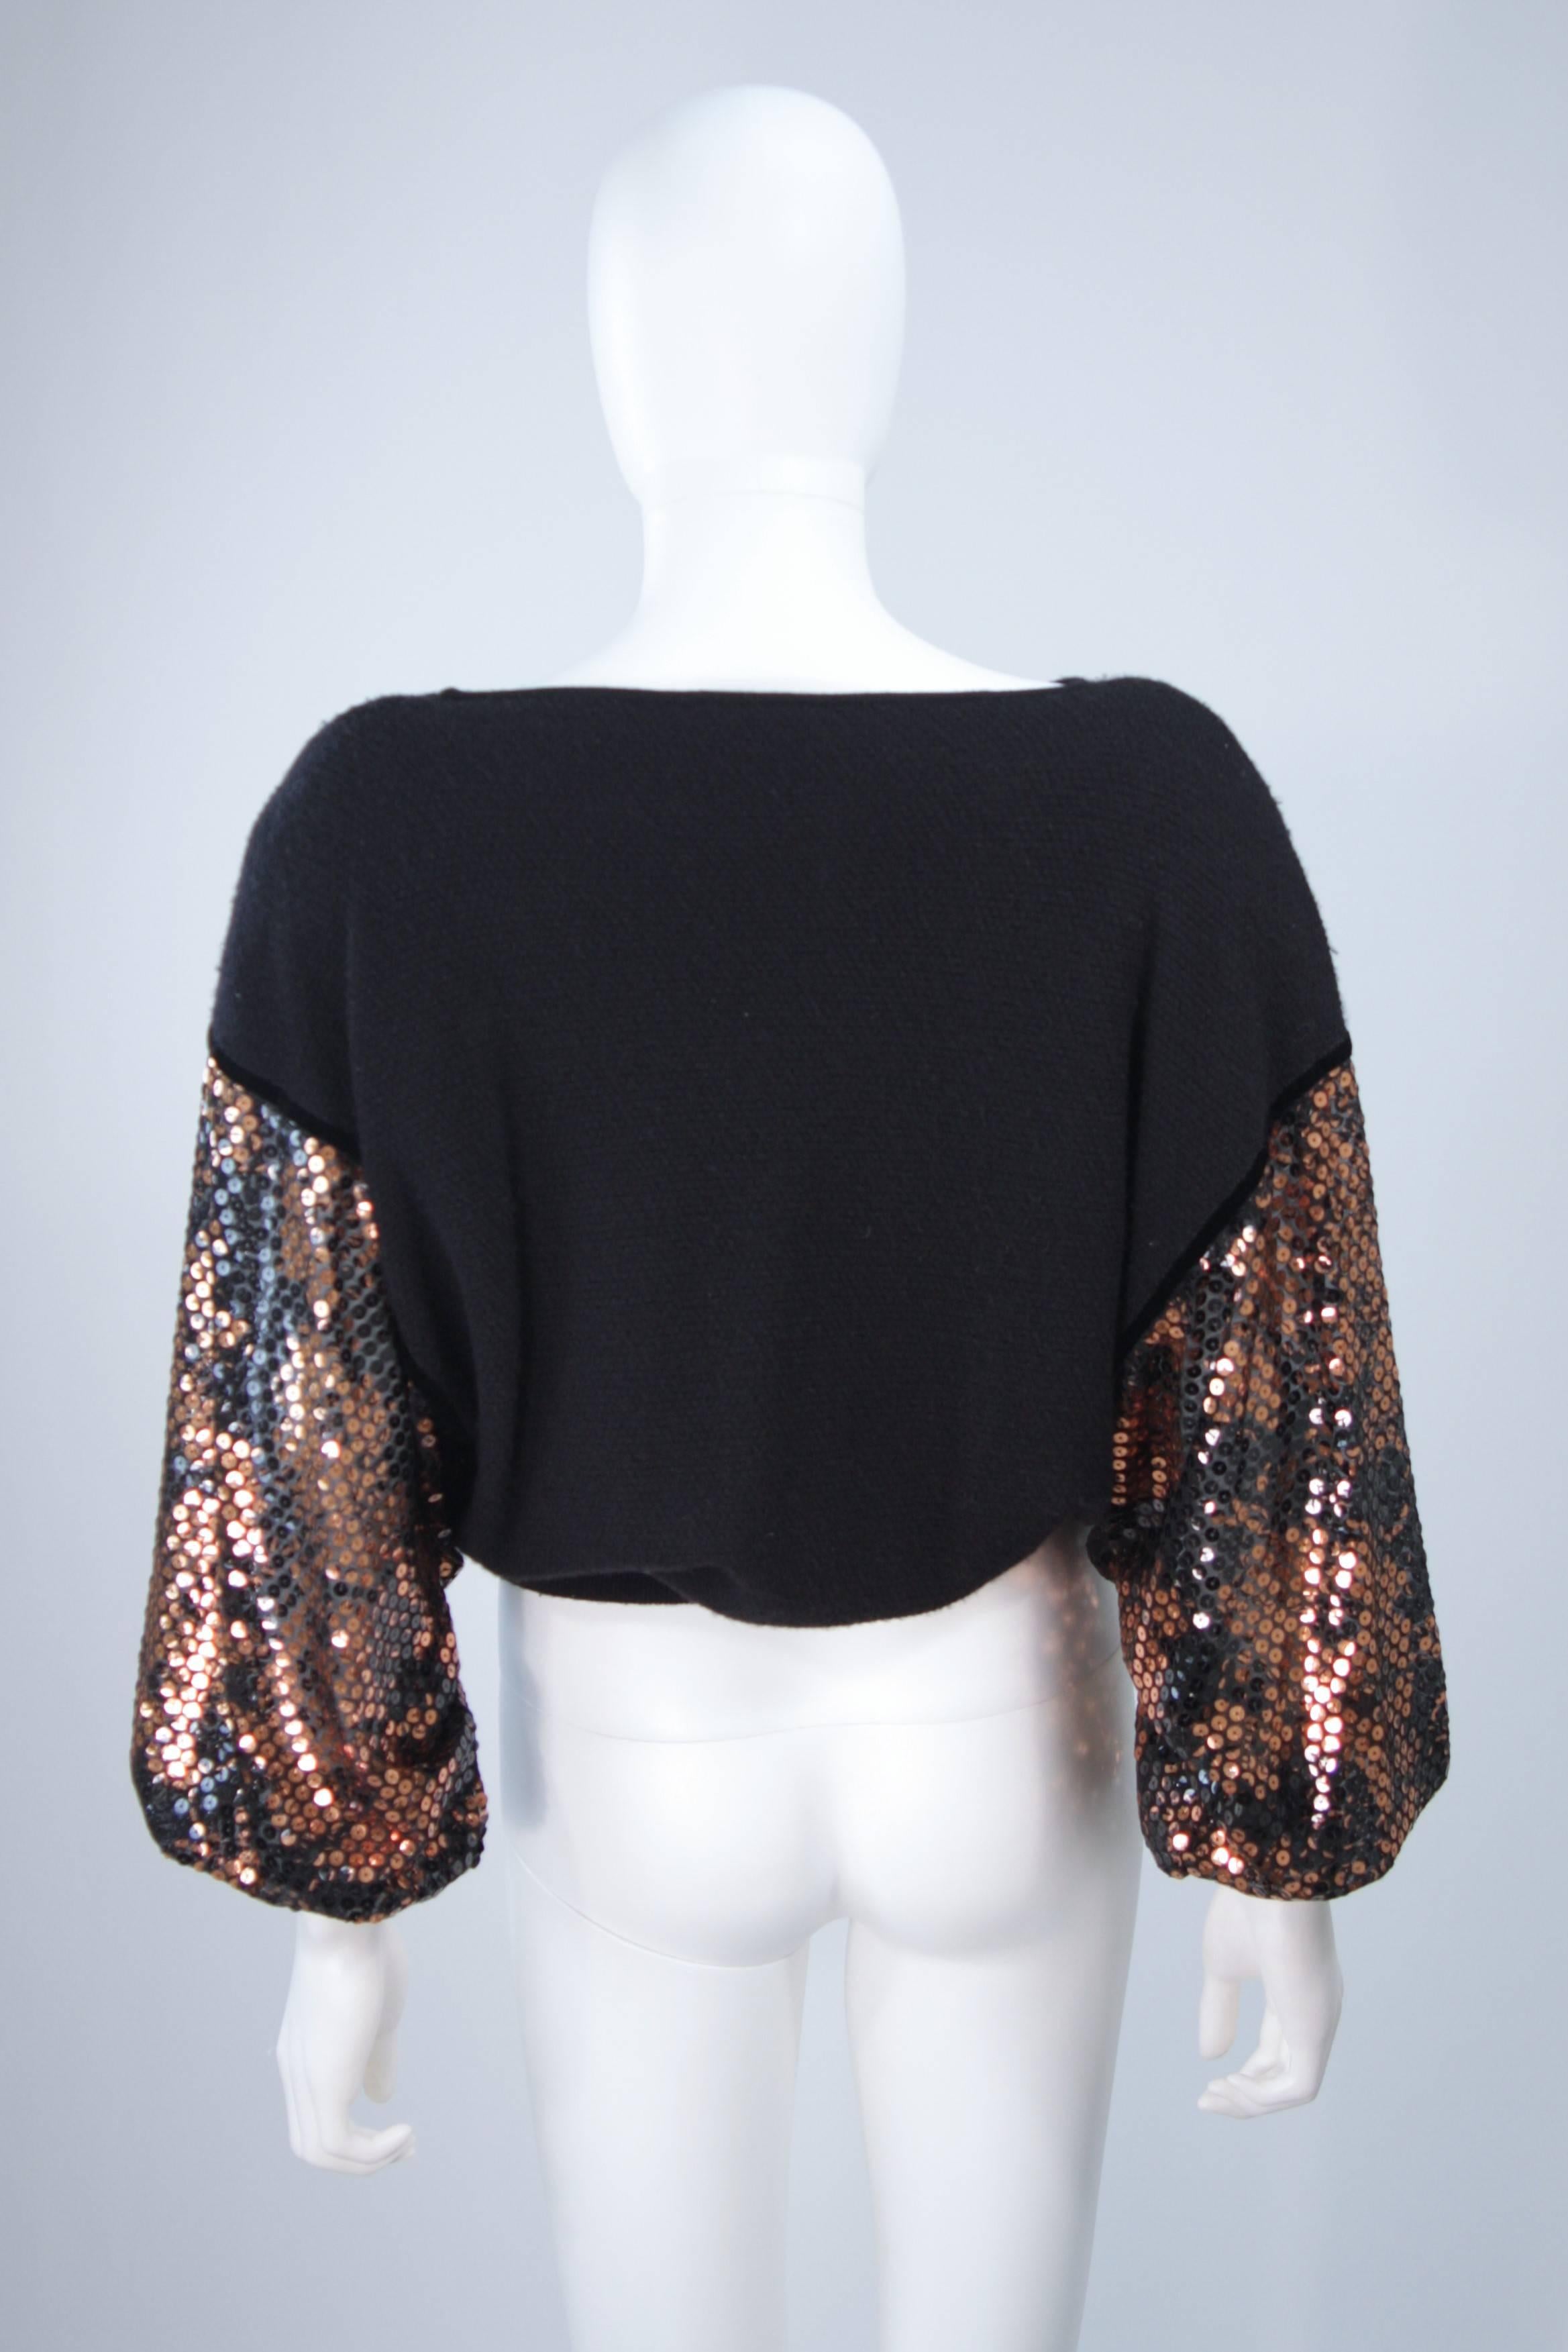 VALENTINO Black Wool Dolman Style Sweater with Sequin Sheer Sleeves Size 6 2